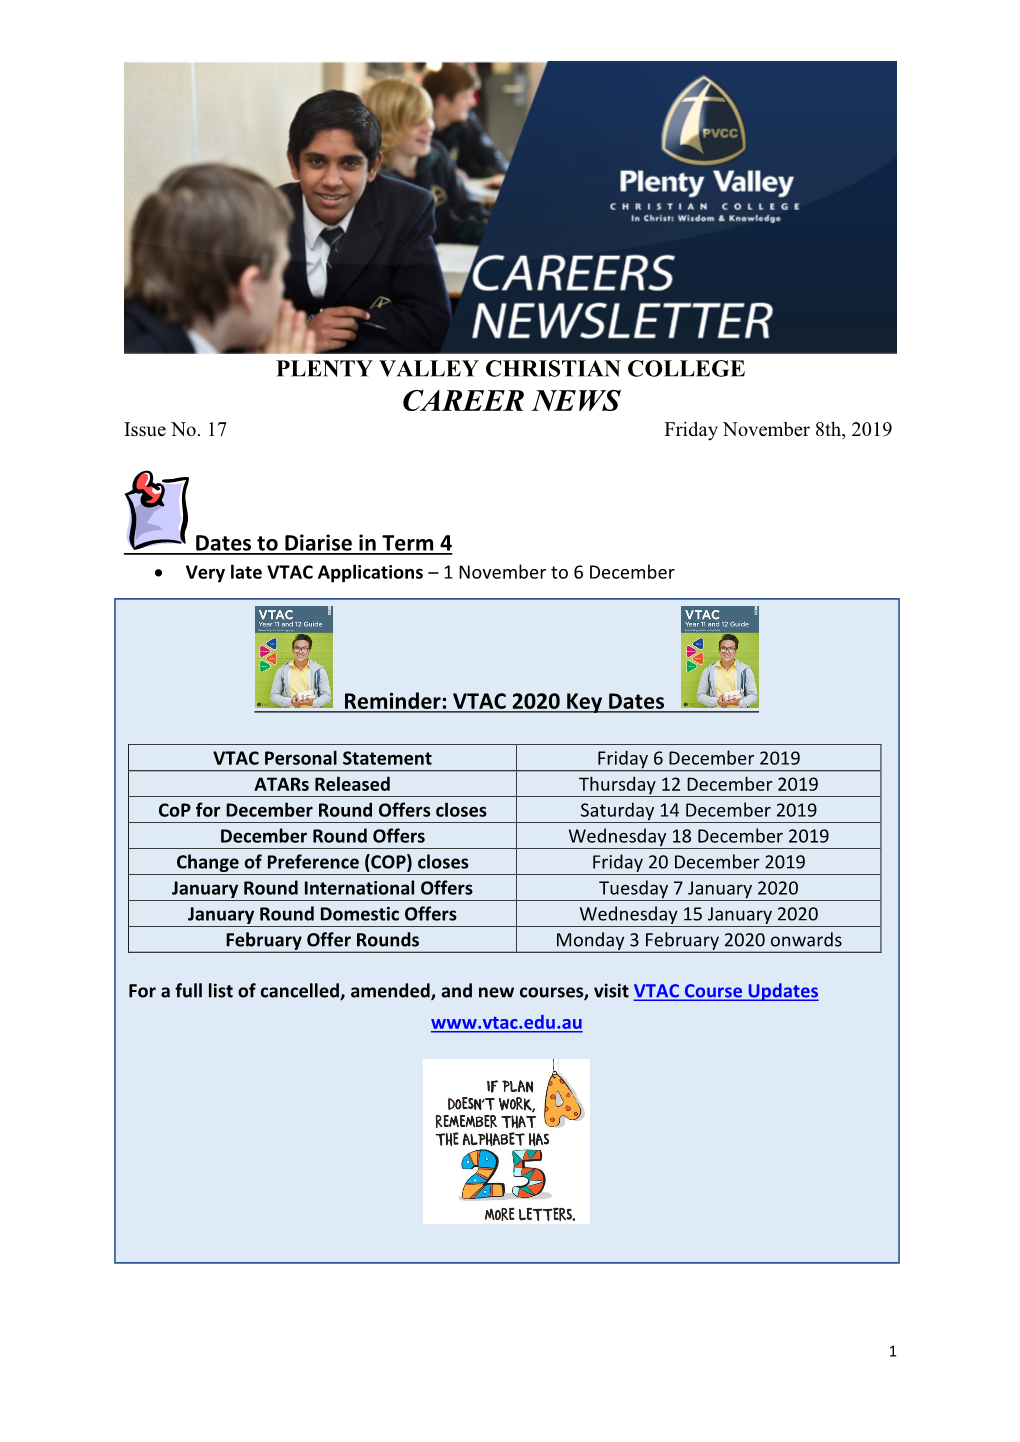 CAREER NEWS Issue No